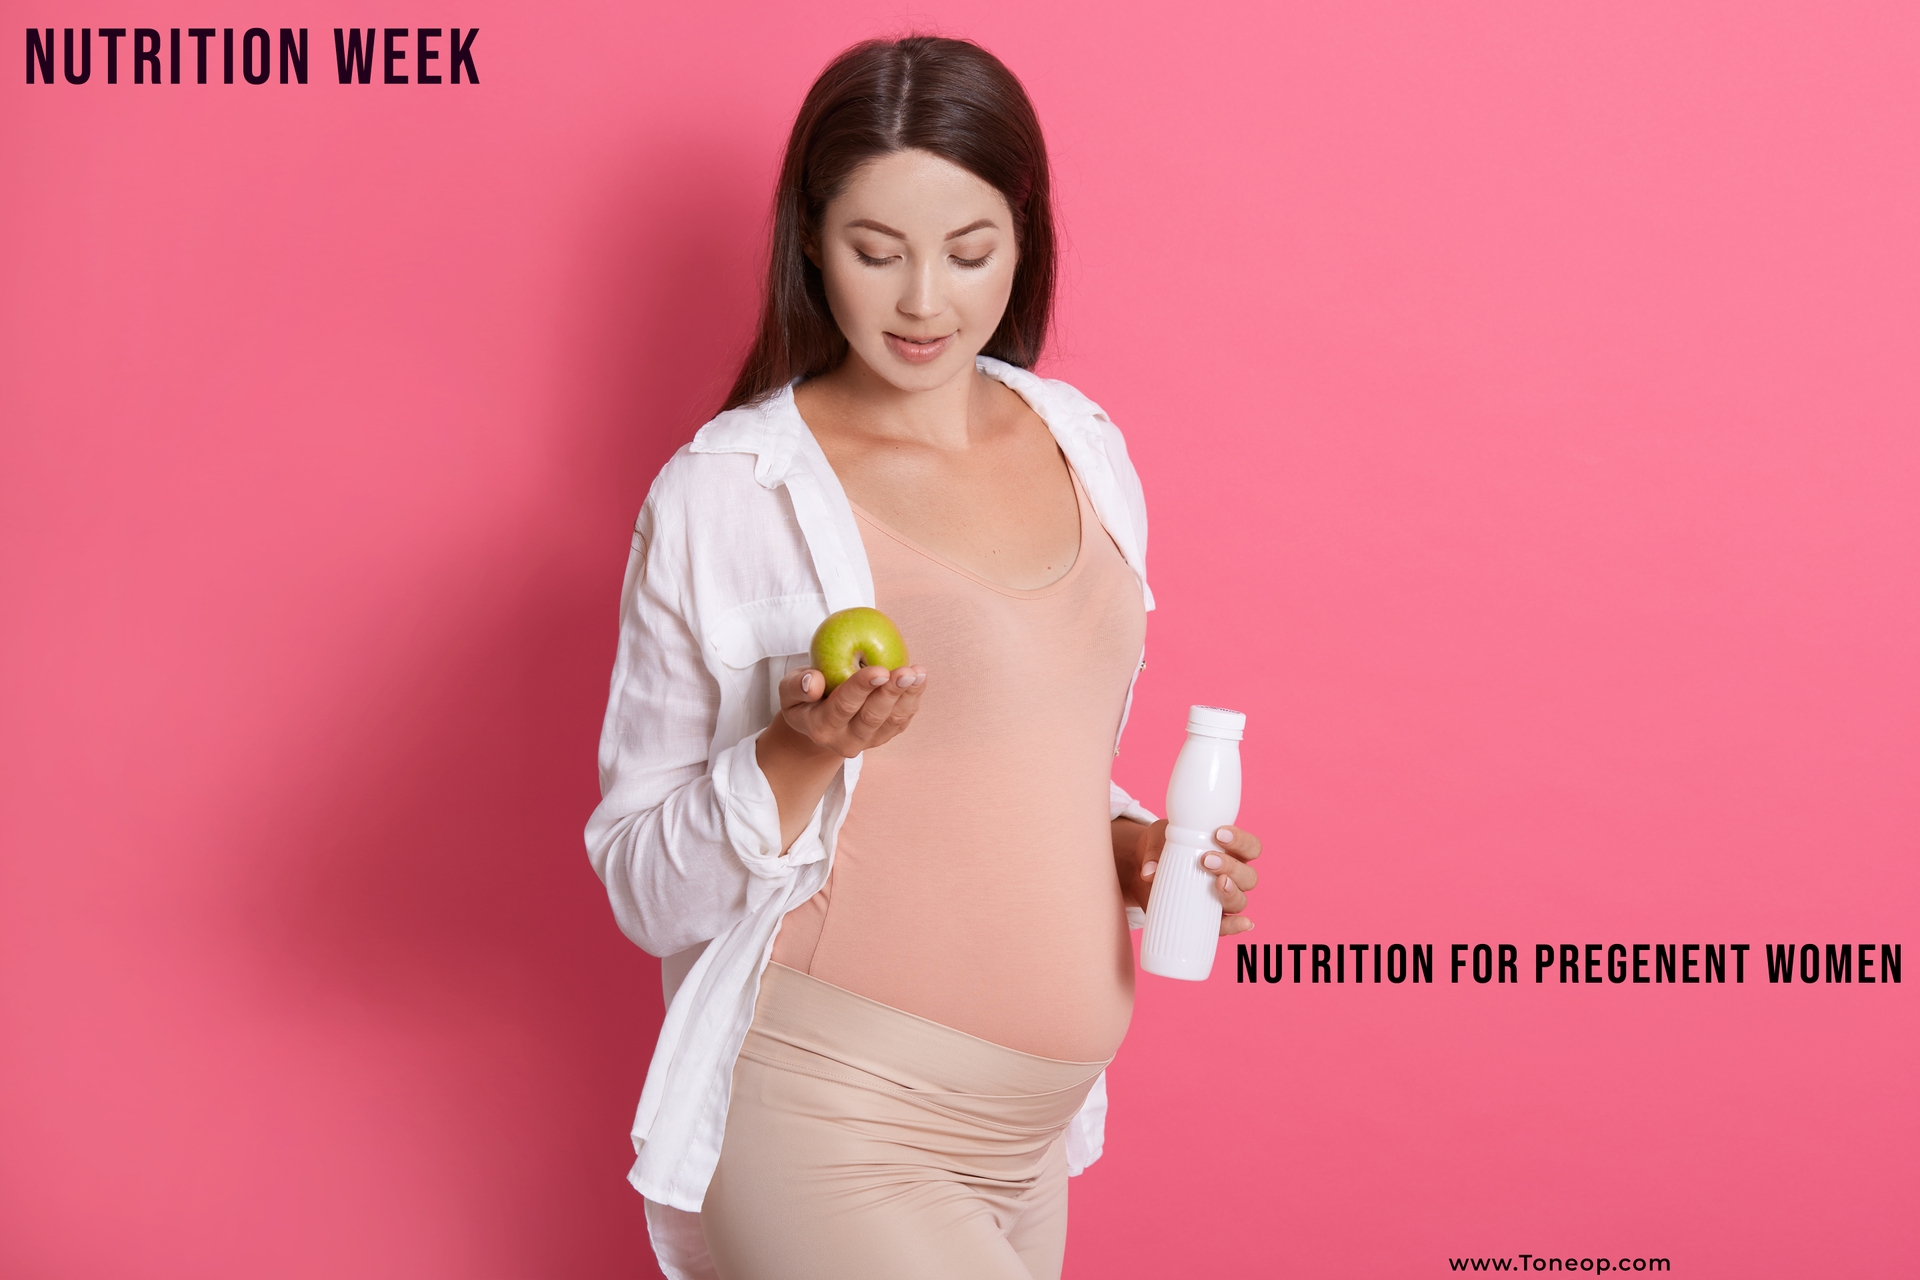 Nutrition Week Day 3: Nutrition For Pregnant Women